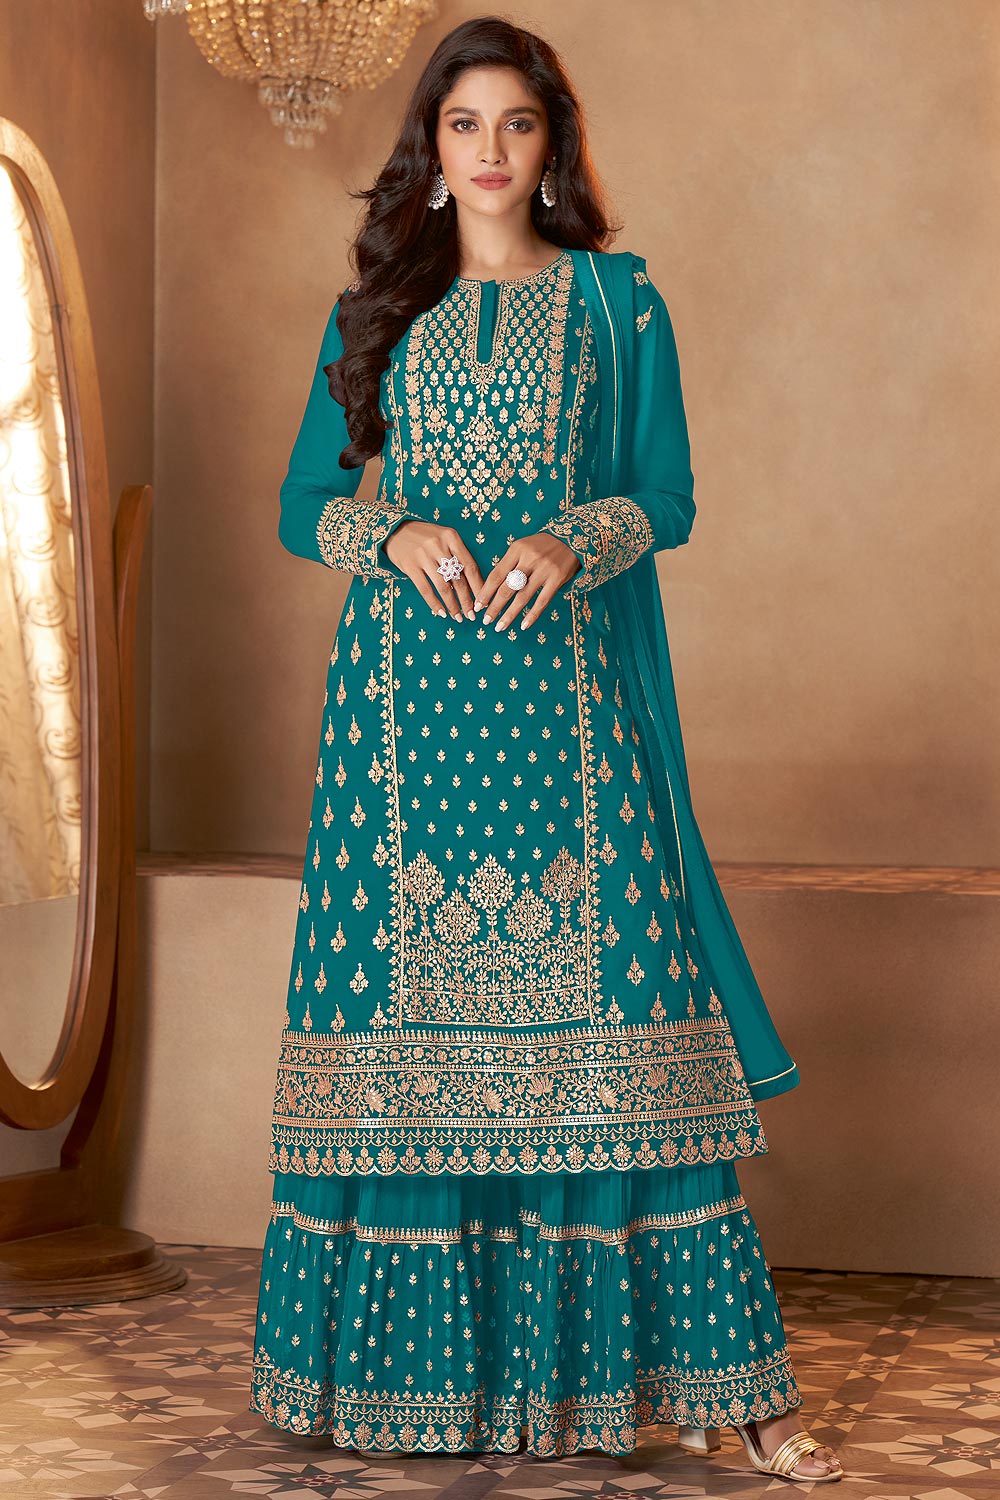 Buy Turquoise Straight Cut Sharara - Embroidered Designer Sharara Suit